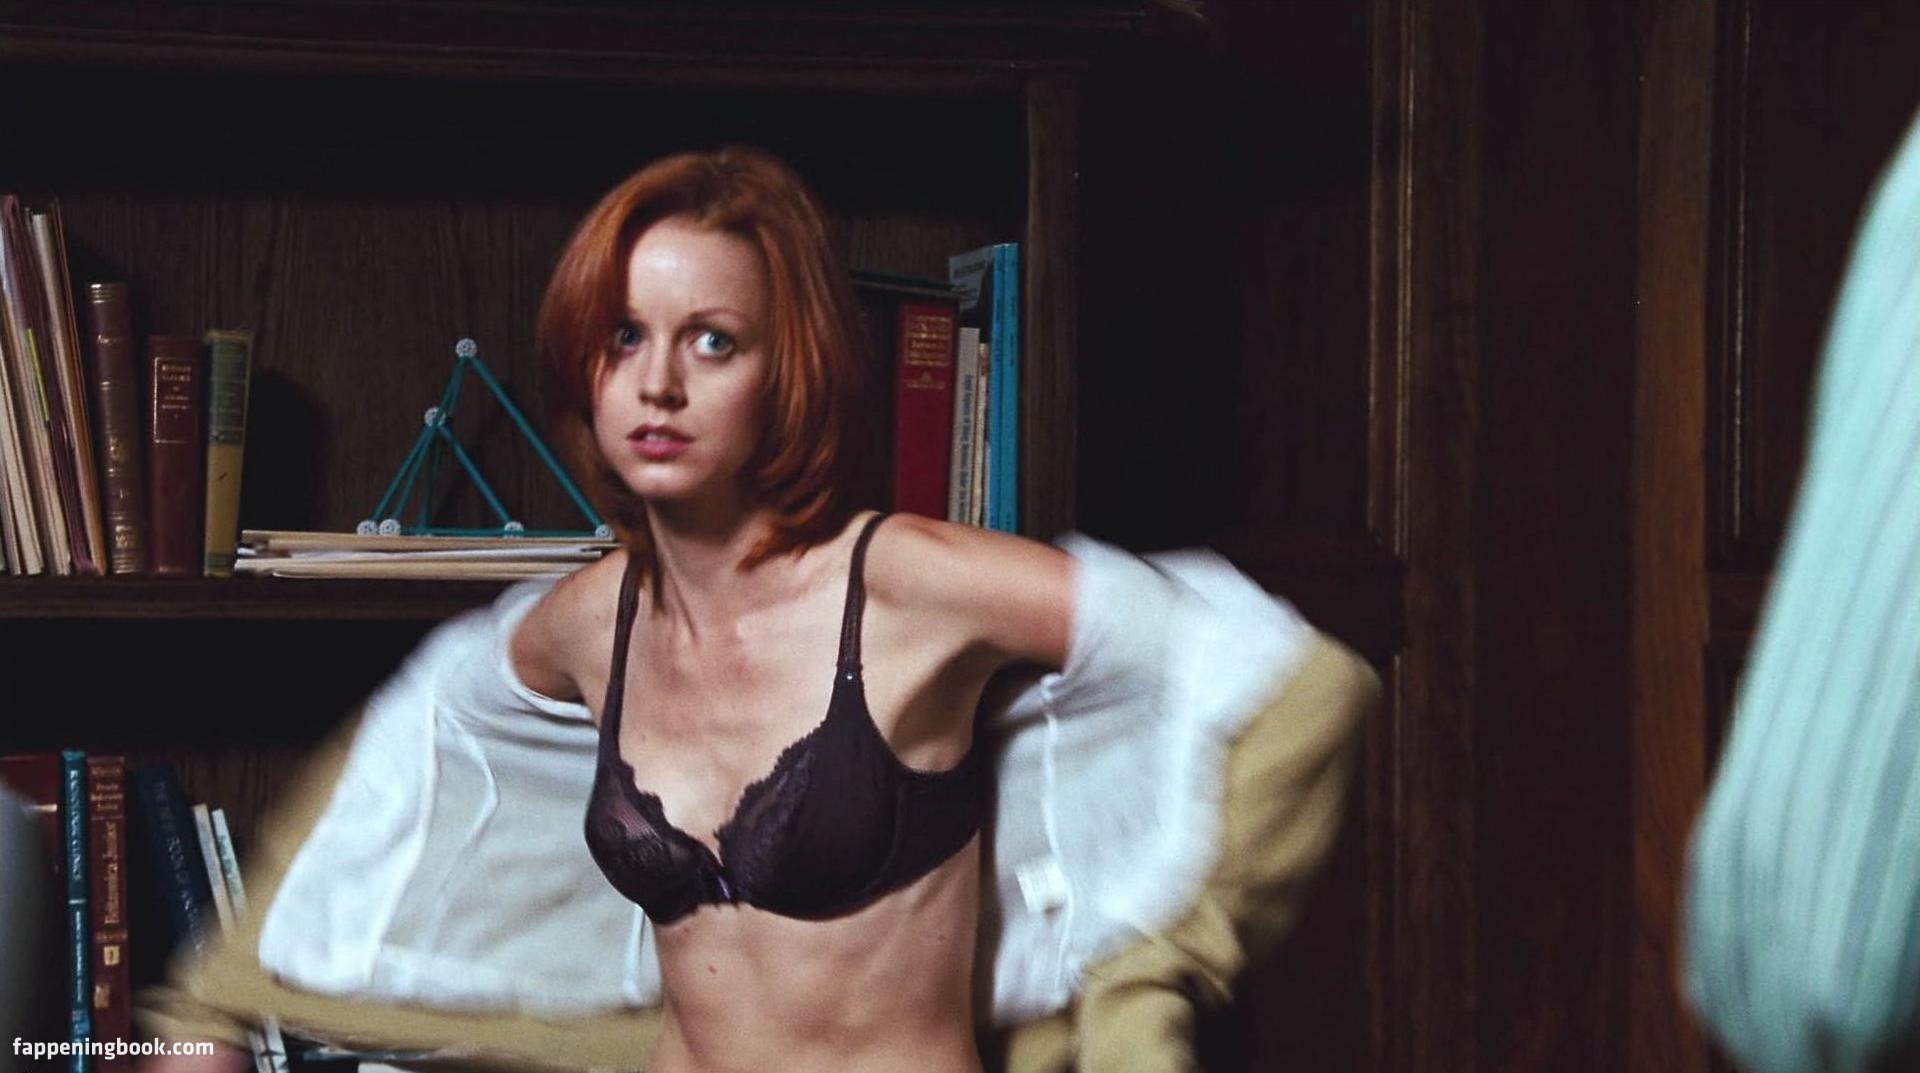 Lindy booth breasts, butt scene in century hotel